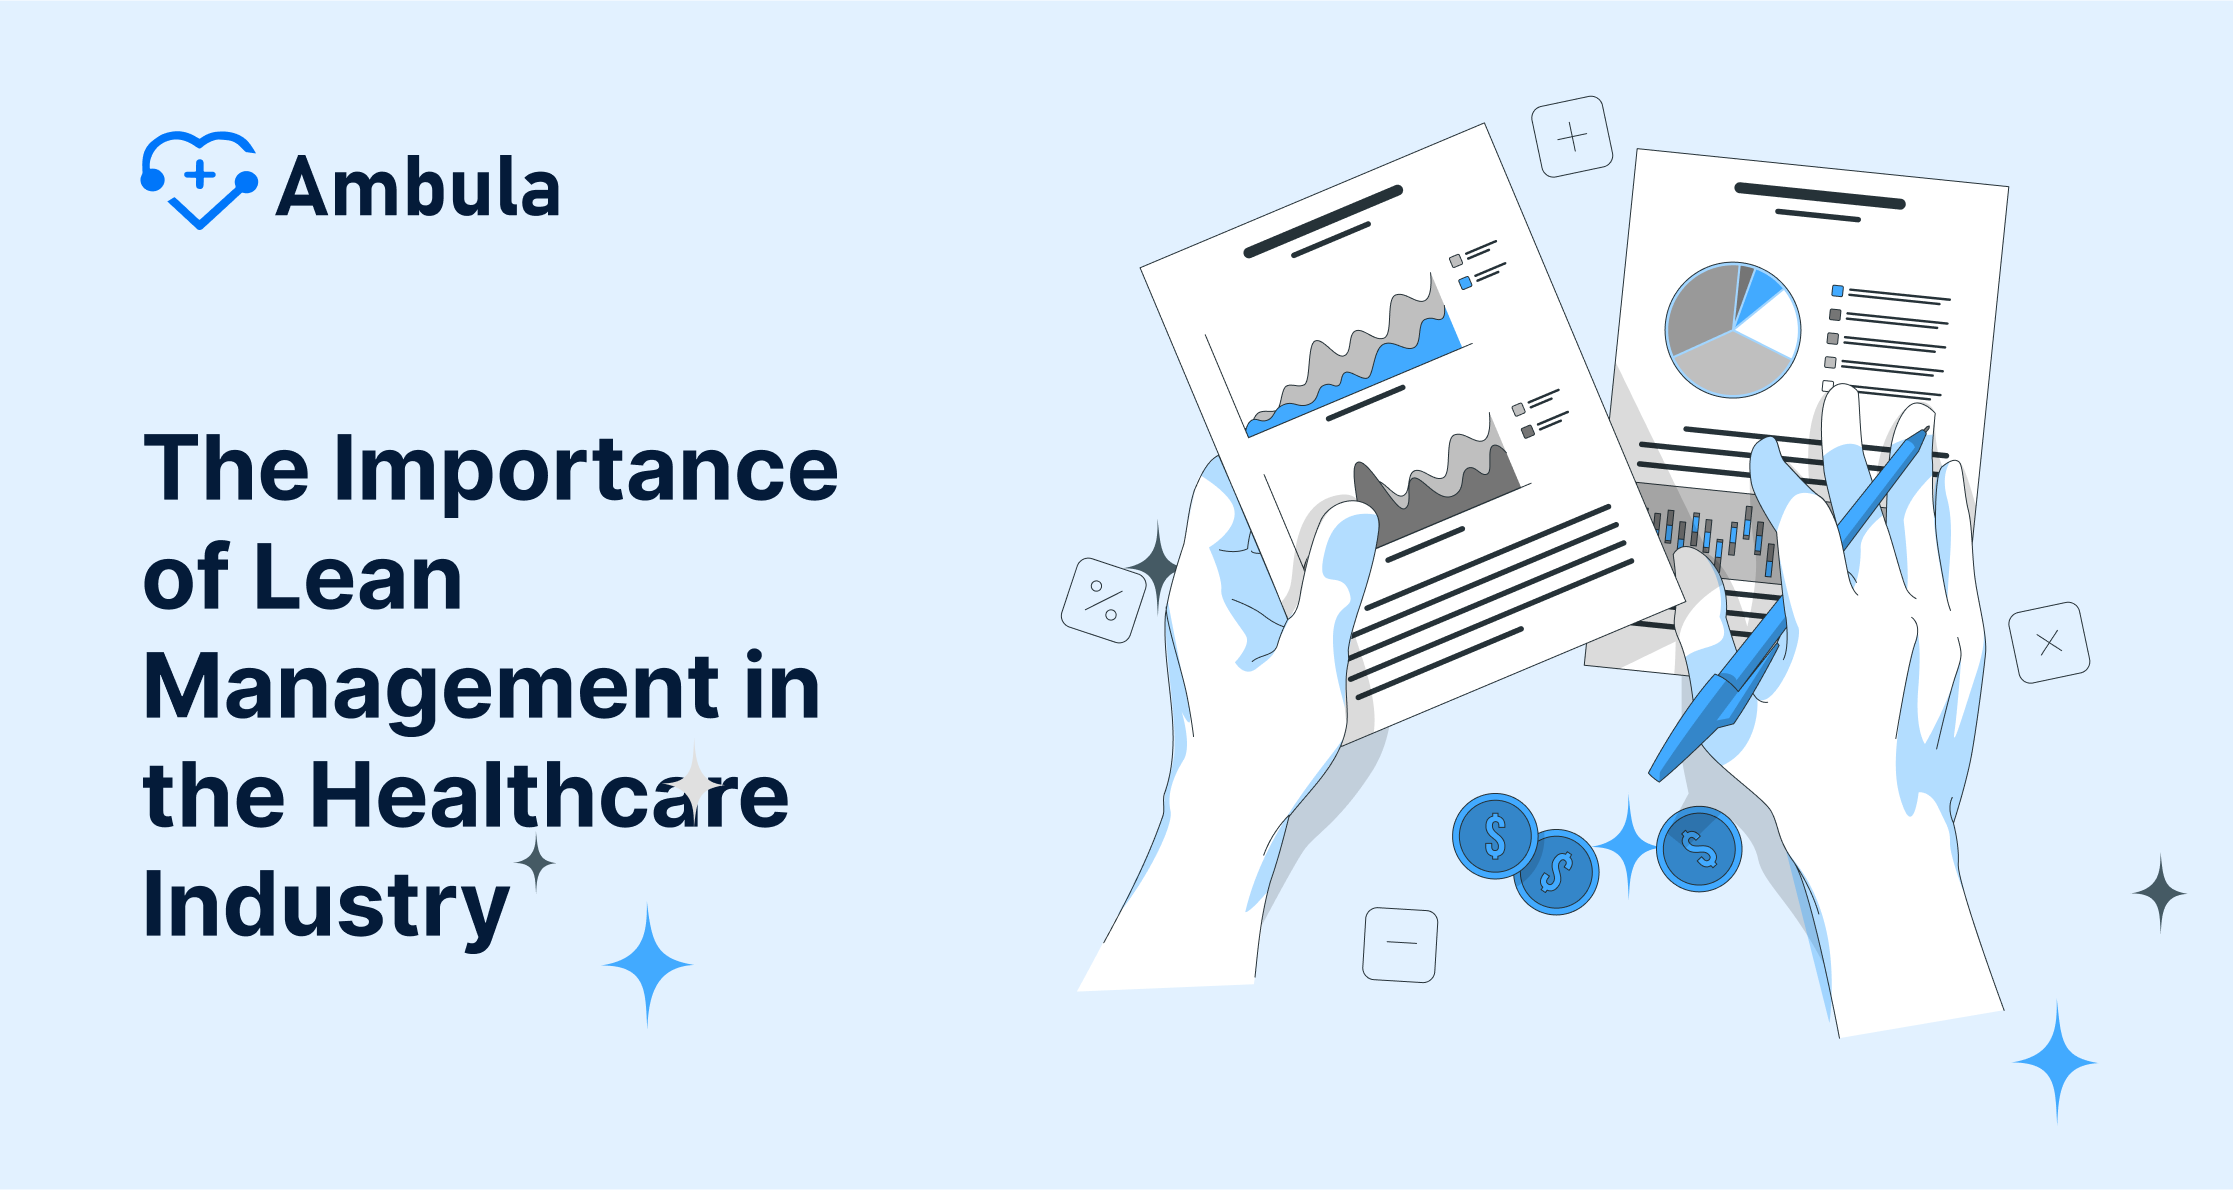 The Importance of Lean Management in the Healthcare Industry